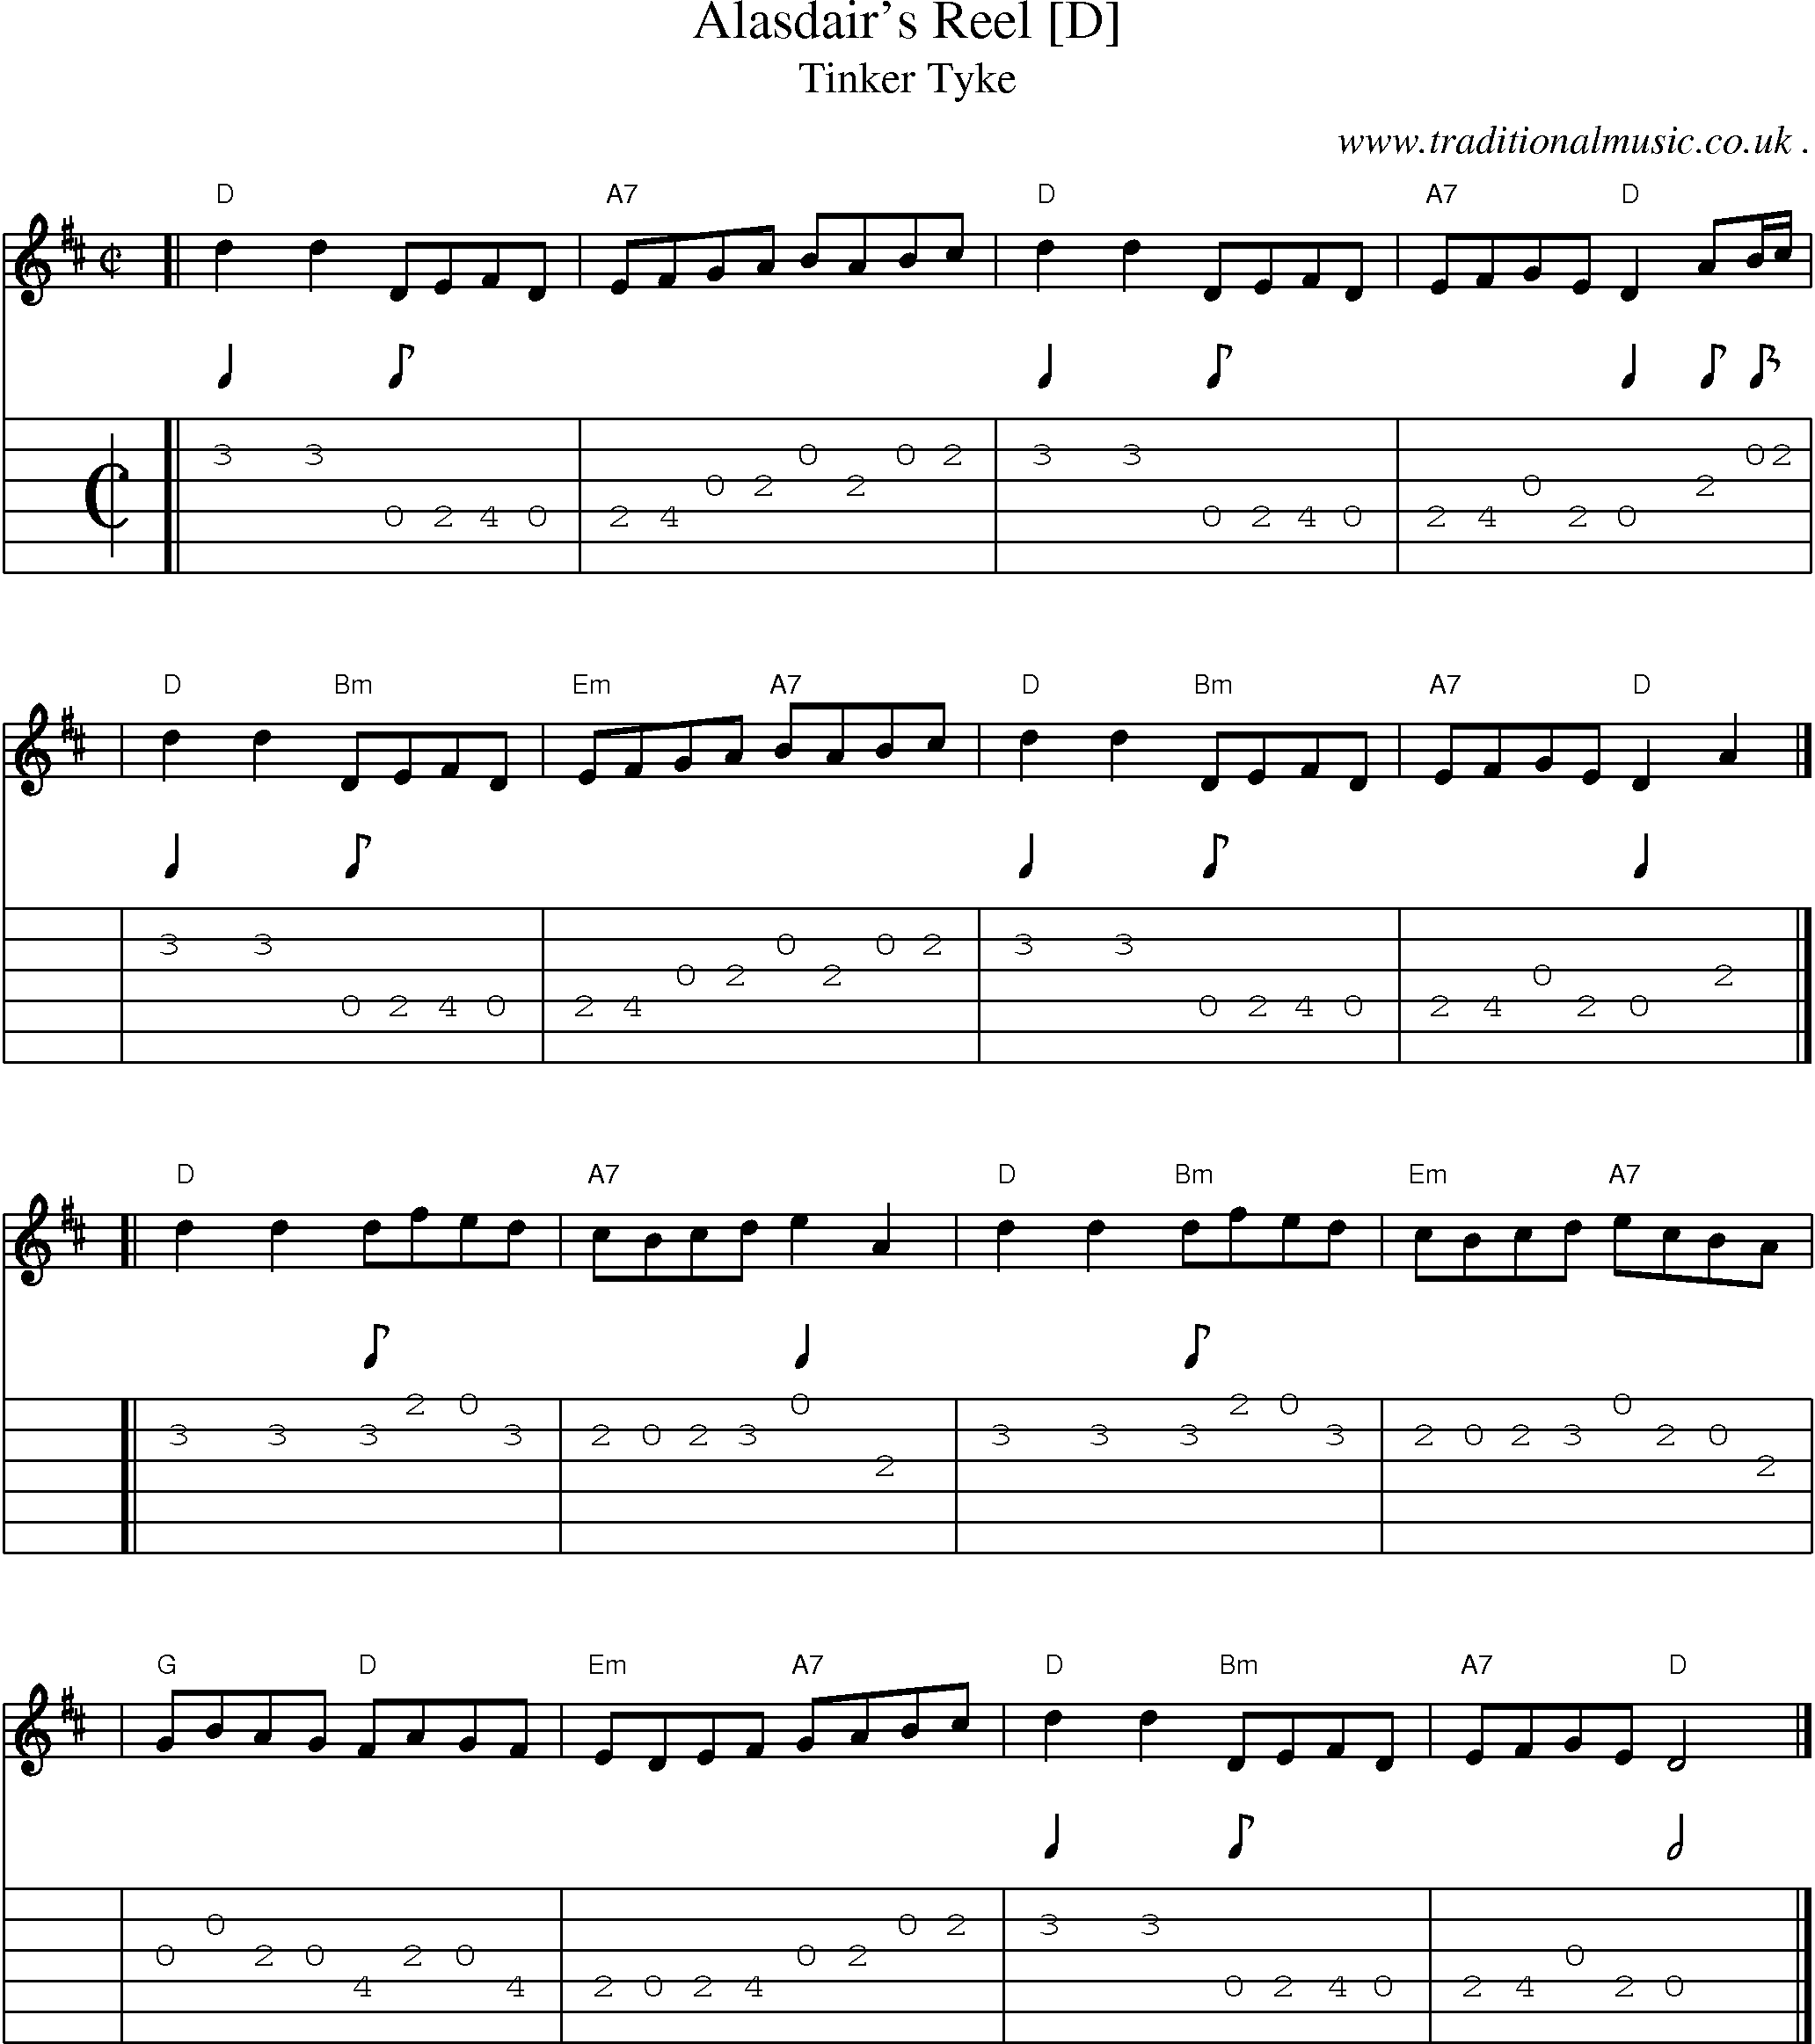 Sheet-music  score, Chords and Guitar Tabs for Alasdairs Reel [d]